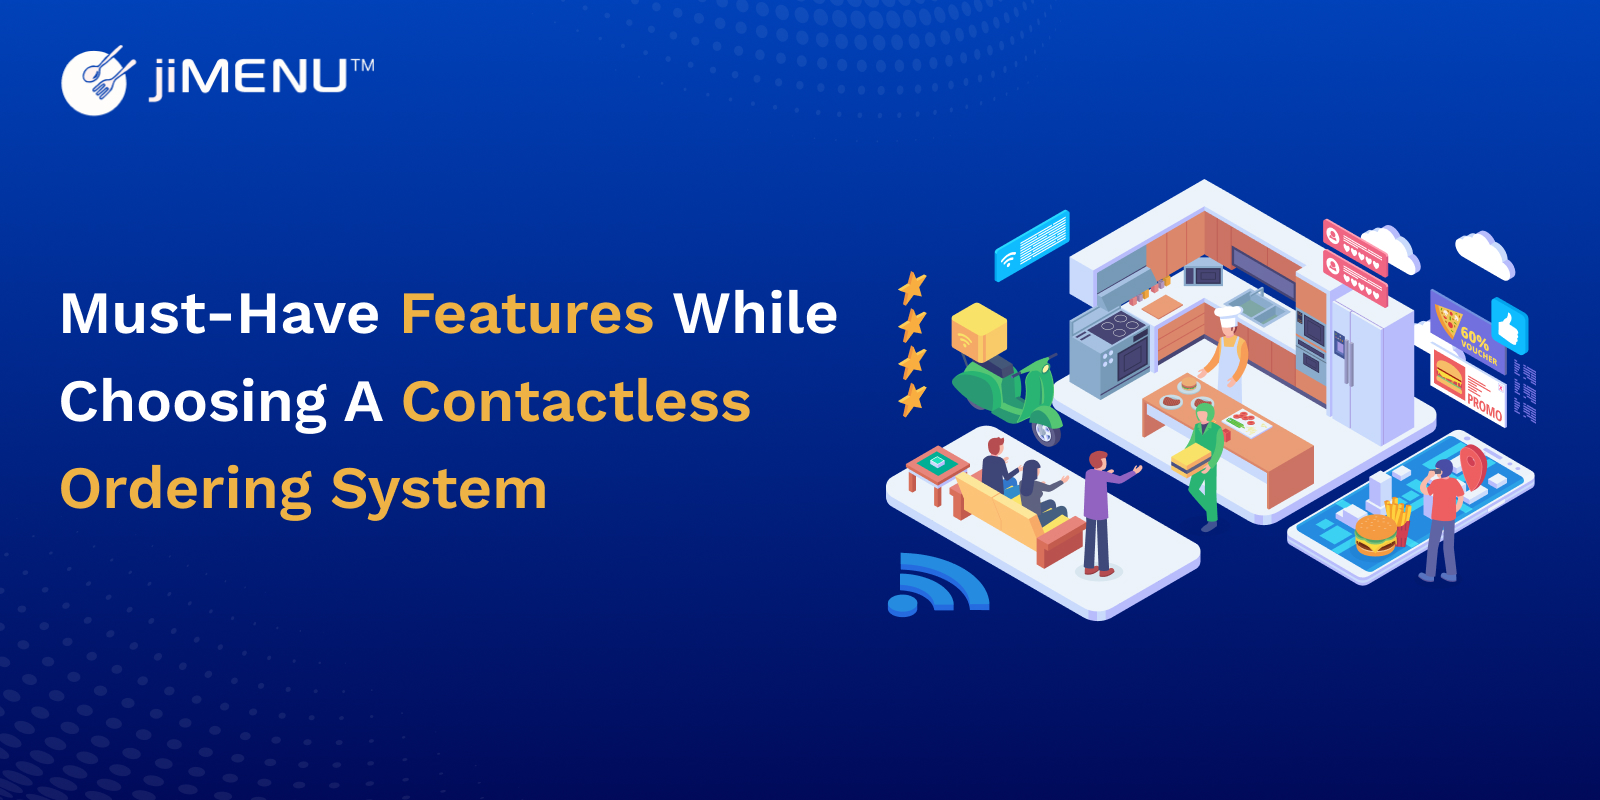 Must-have features while choosing a contactless ordering system